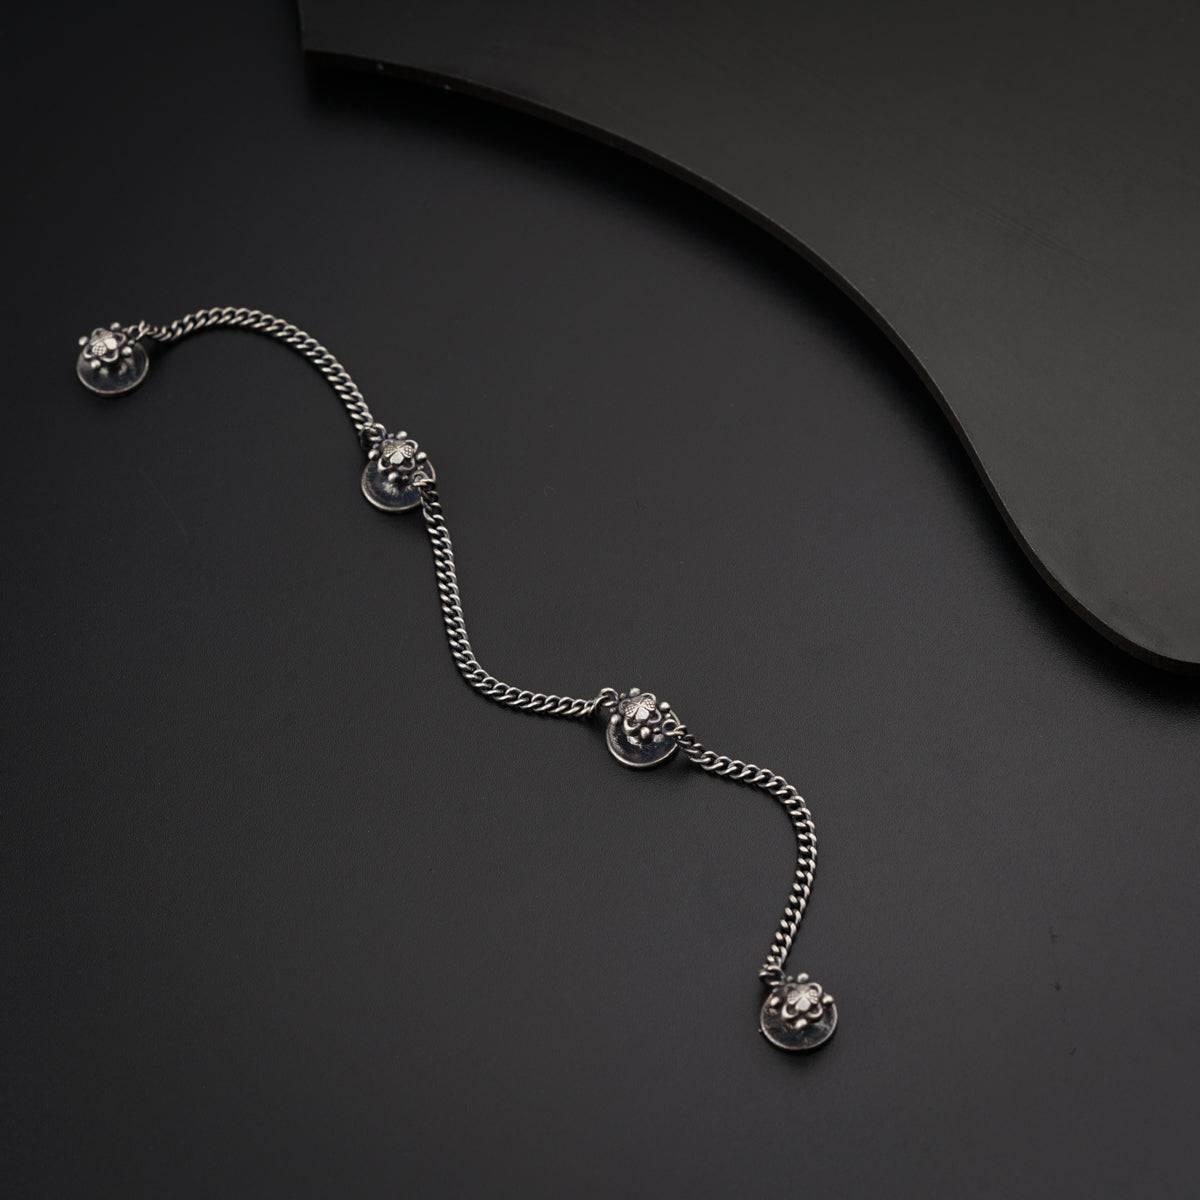 a silver bracelet with a chain on a black surface